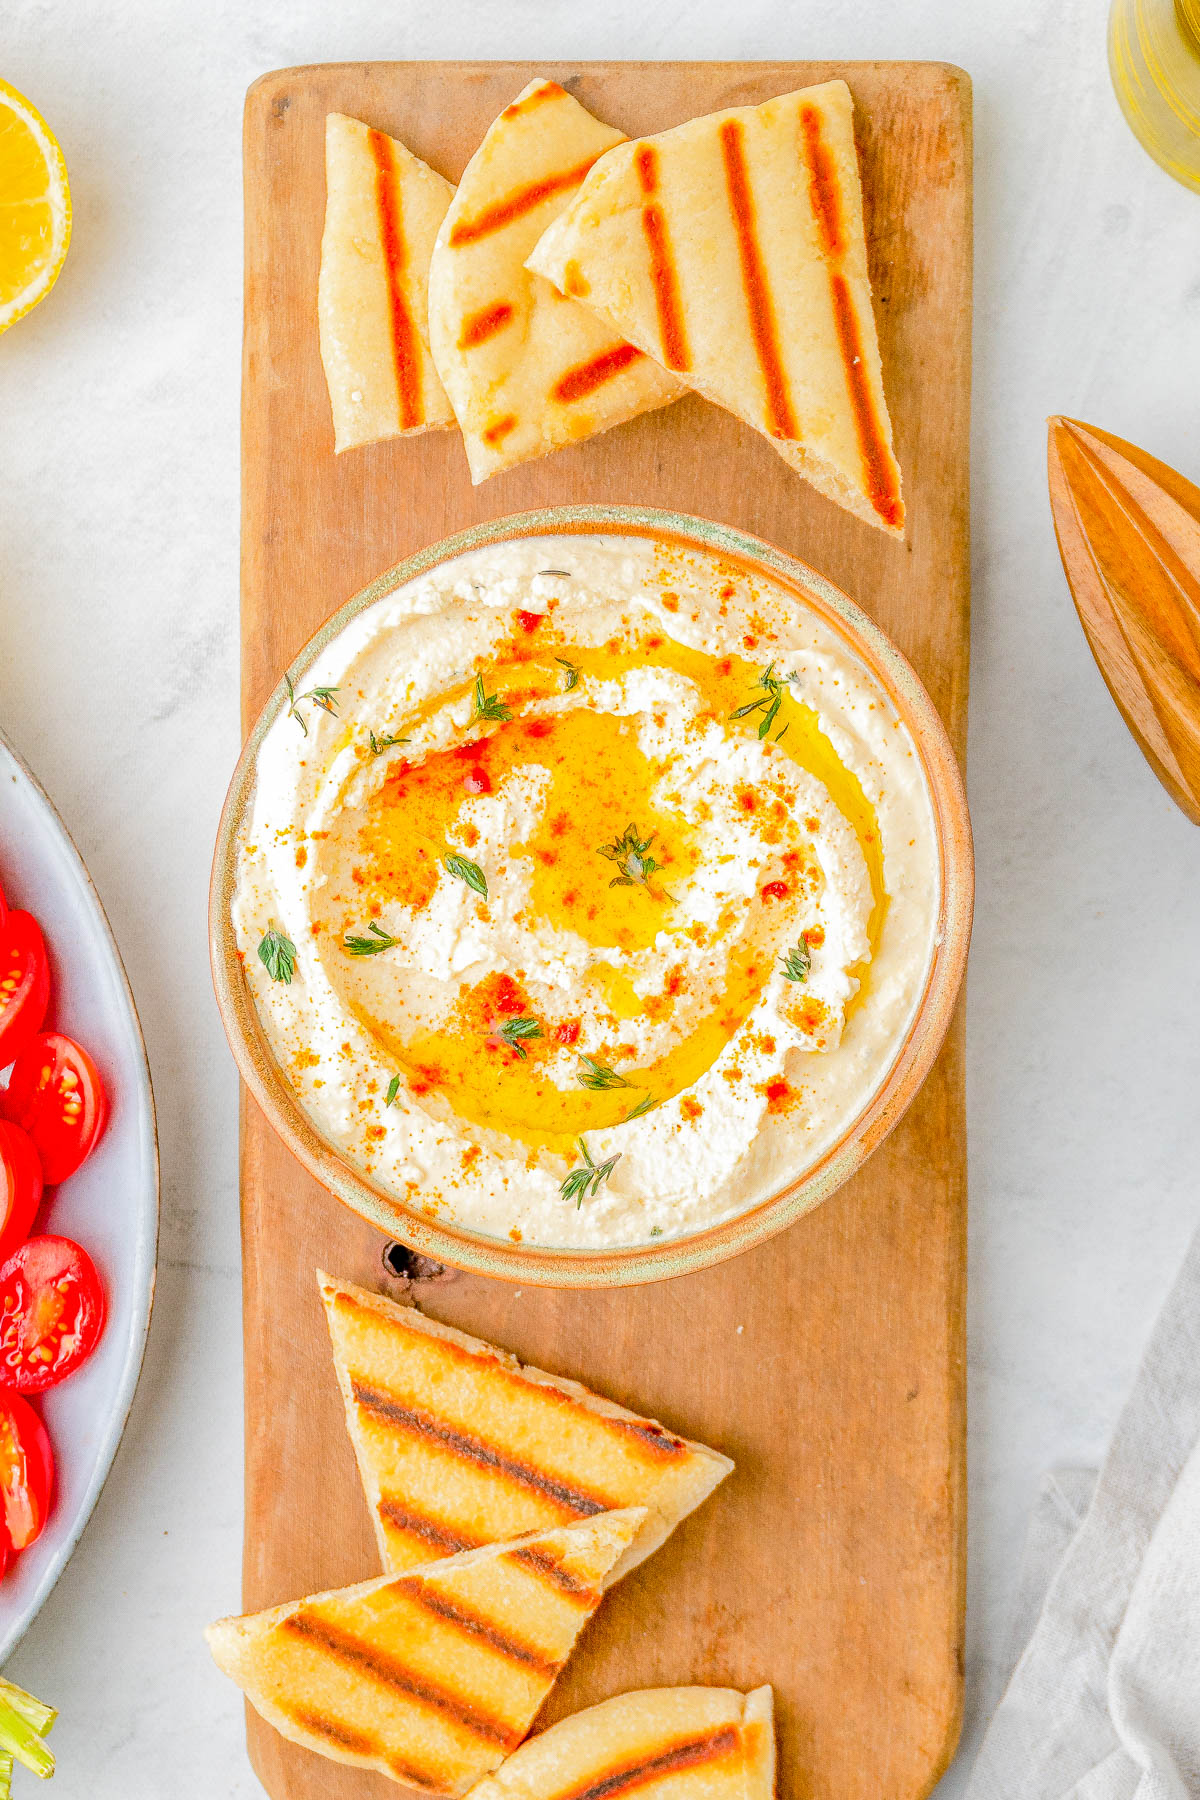 Whipped Feta Dip - Ready in just 5 minutes and made with feta cheese, Greek yogurt, lemon, garlic, olive oil, and a variety of spices, this creamy and EASY dip is a FAVORITE! Just the right amount of tangy-salty-creamy! It's PERFECT for holiday or casual entertaining, game day parties, or summertime backyard get-togethers and everyone will want the recipe!